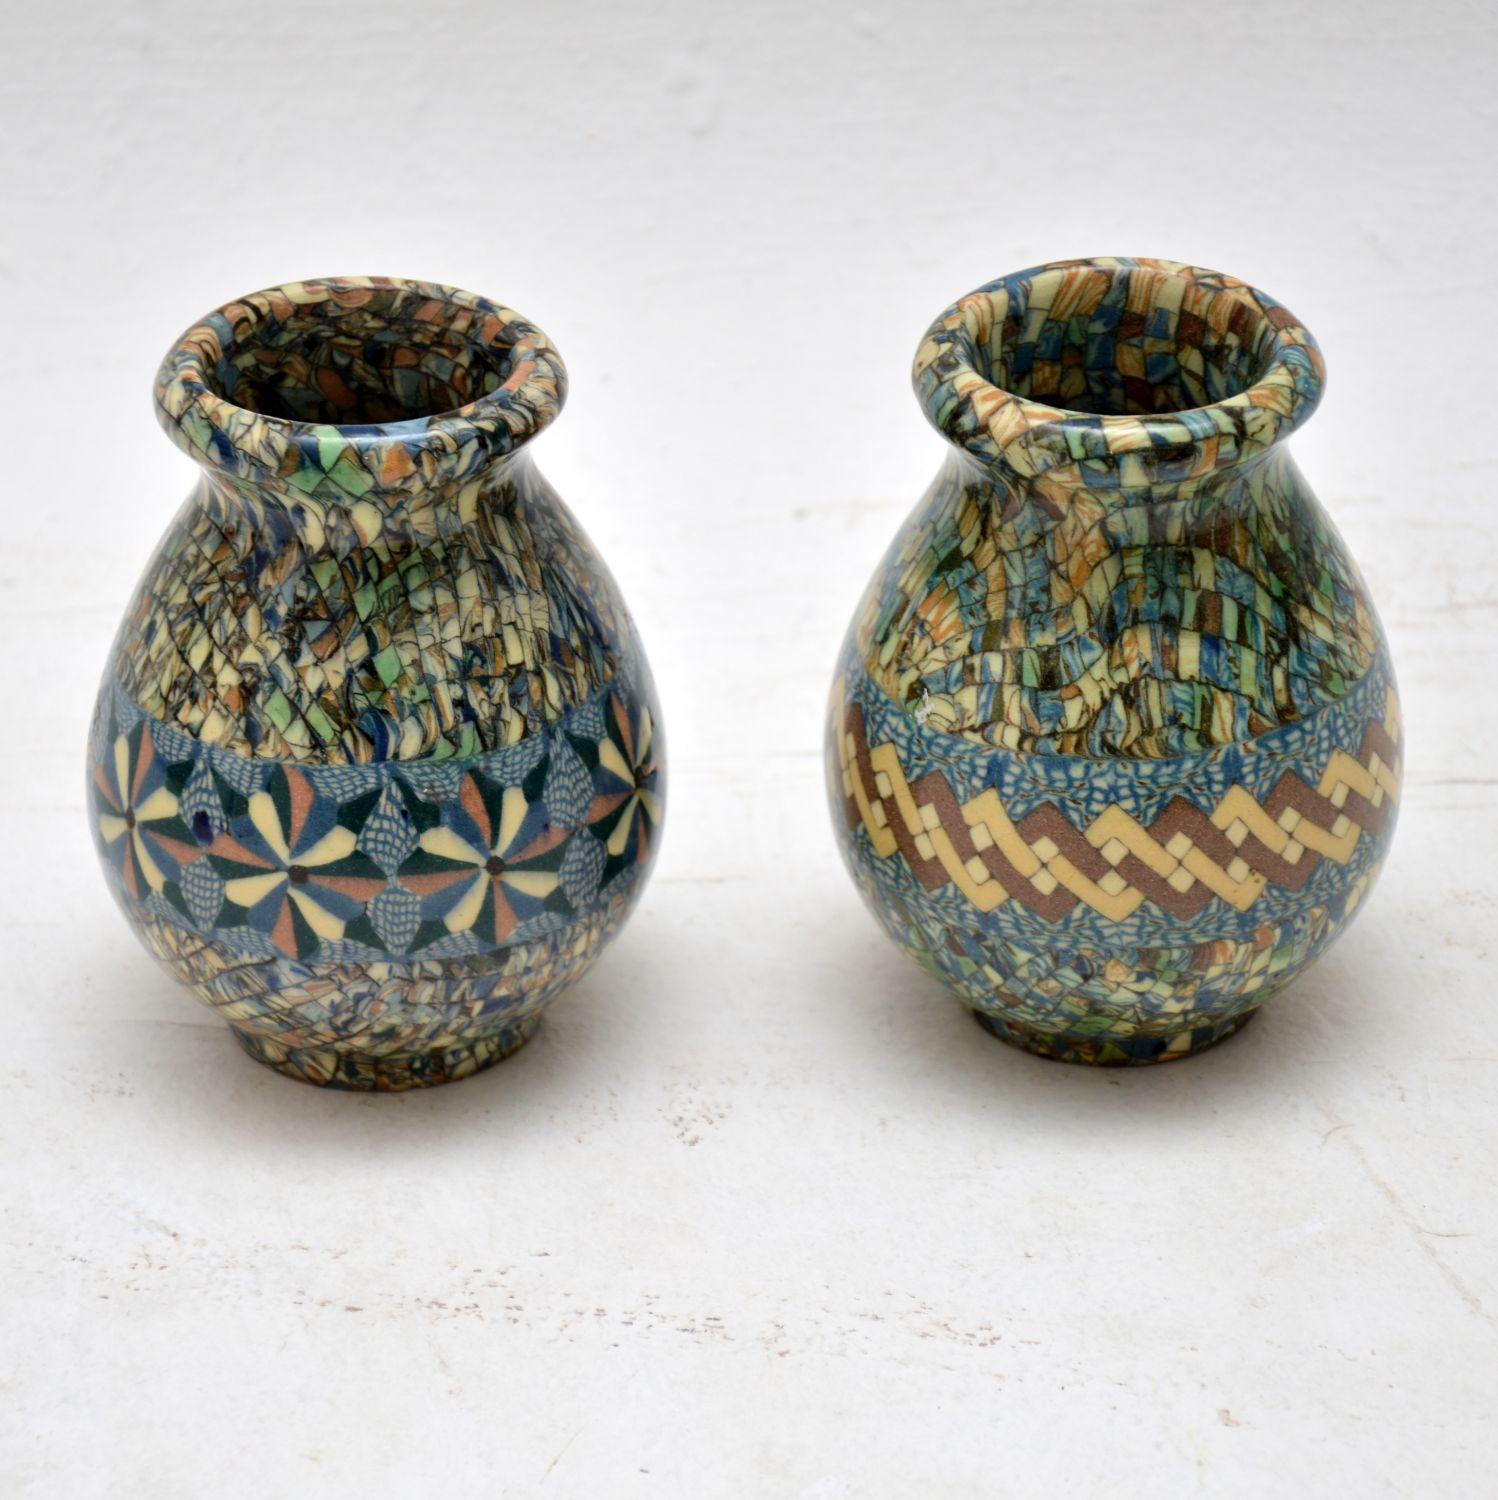 A beautiful pair of ceramic ‘Mosaic’ vases, these were designed by Jean Gerbino and were made by Vallauris in France in the 1960’s. They are signed on the undersides, and they are in superb condition, with no wear or damage to be seen.

Measures: